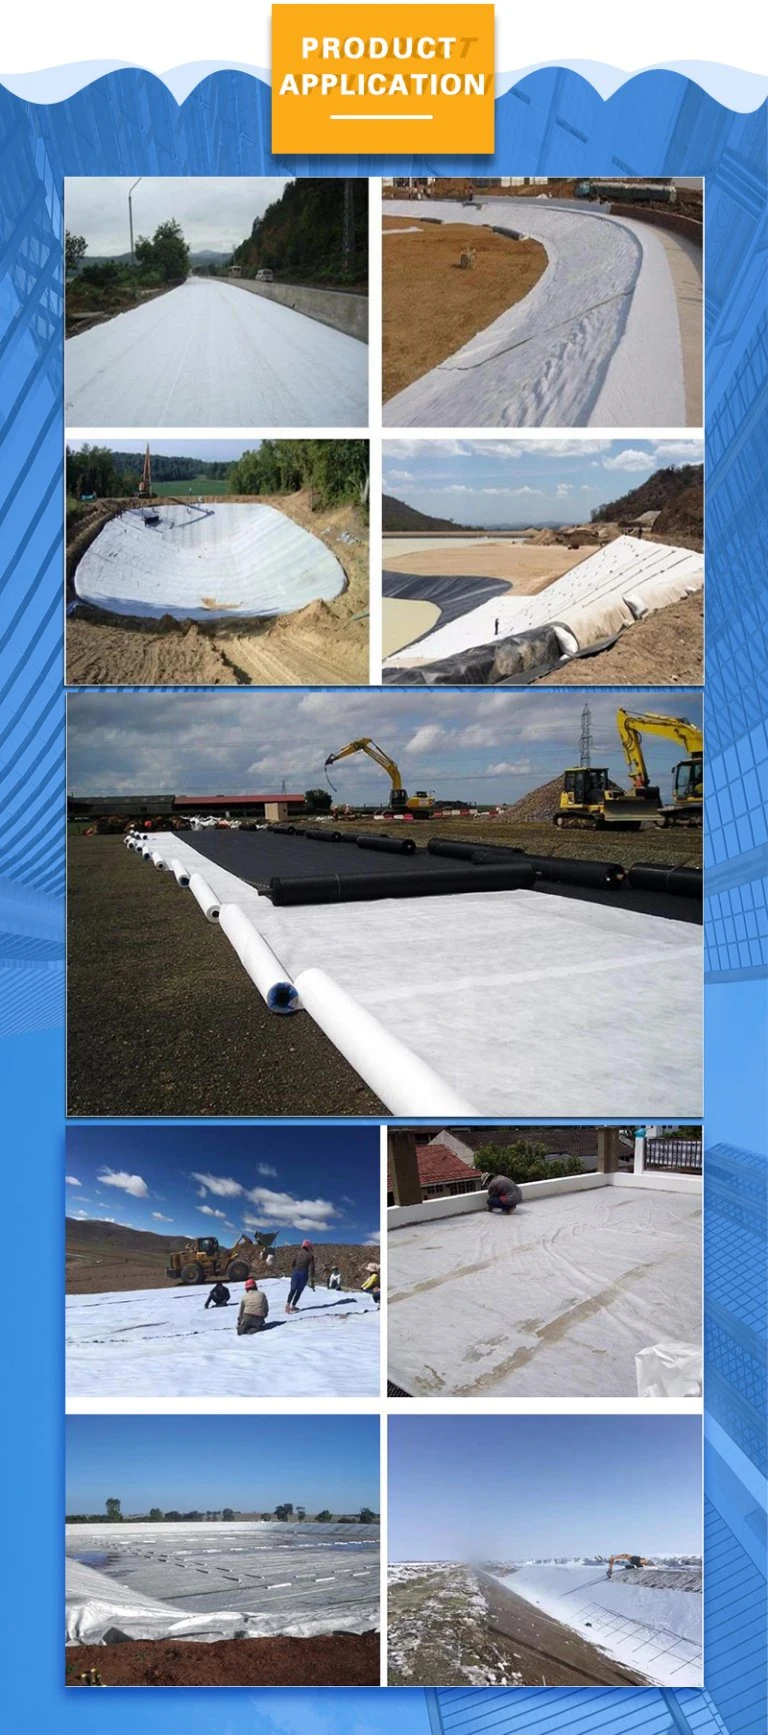 Polyesterpp Spunbond Nonwoven Impermeable Geotextile for Grow Bags